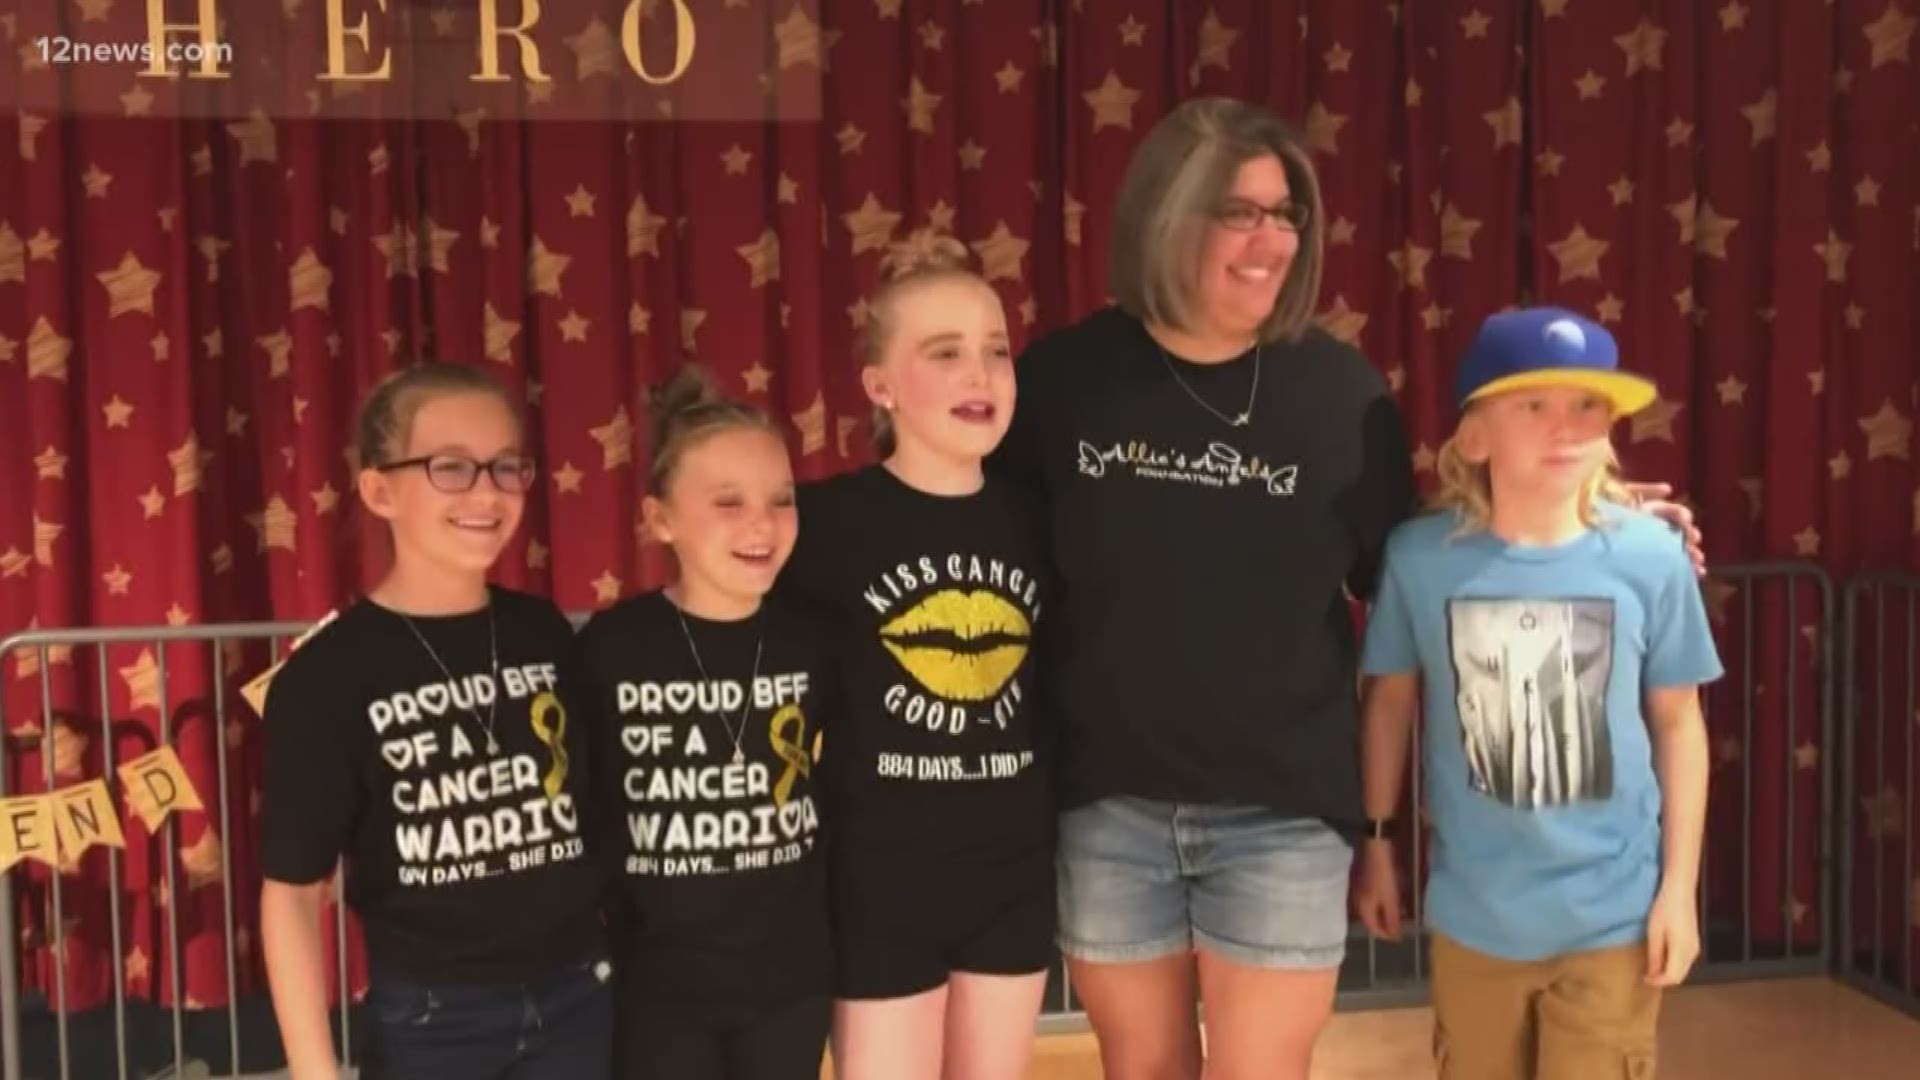 11-year-old Allie Hansen has been battling acute lymphoblastic leukemia for the past two and a half years. With her friends by her side, Allie celebrated being cancer free and getting to finally go home.